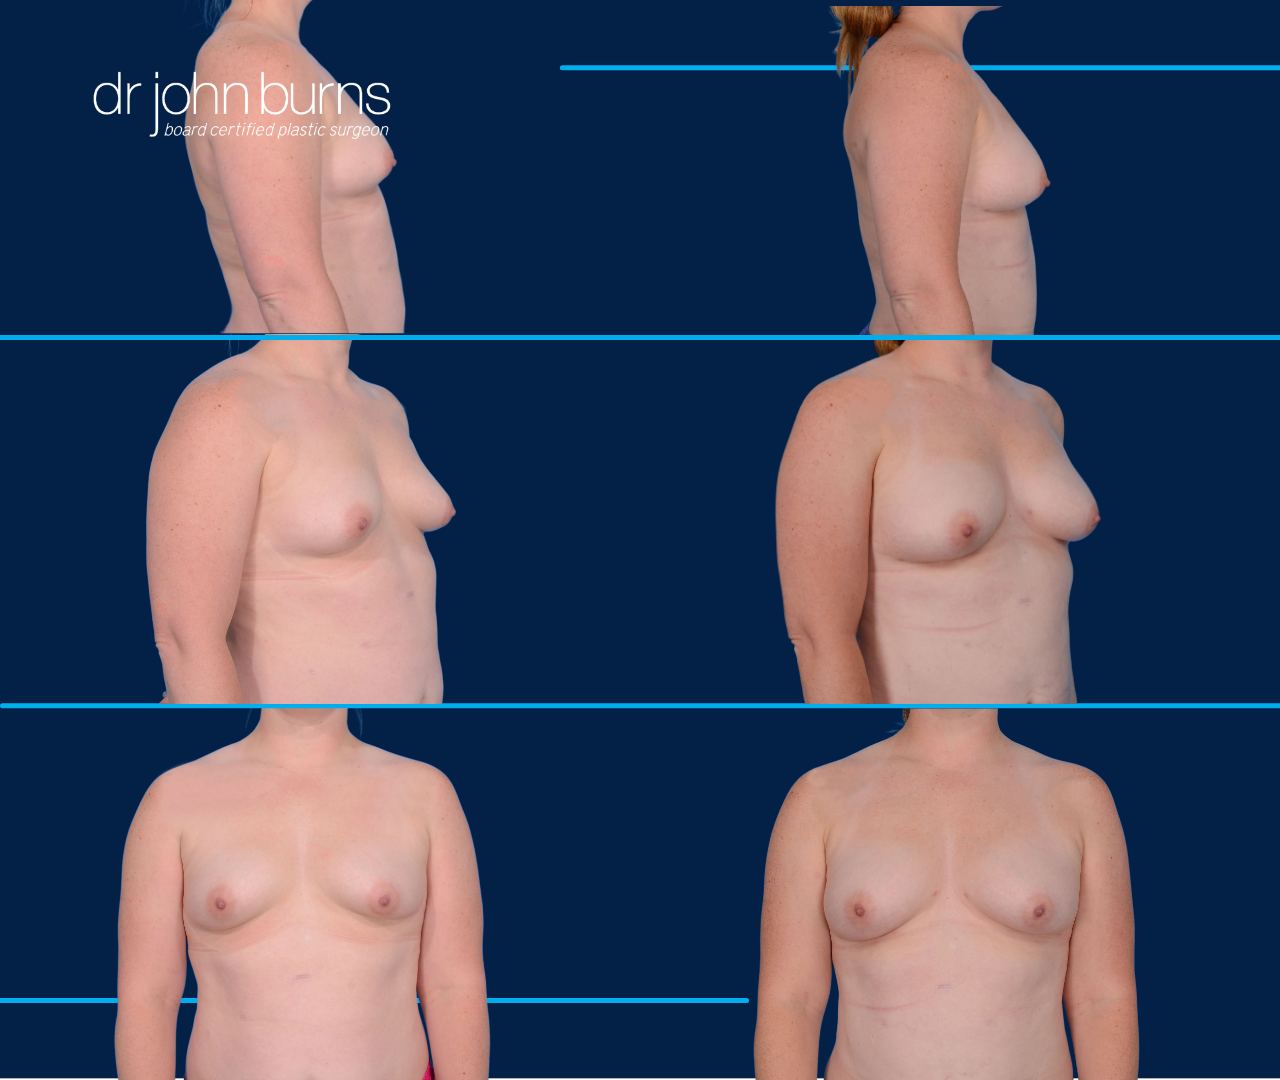 case 16- before and after breast augmentation fat transfer by top plastic surgeon, Dr. John Burns